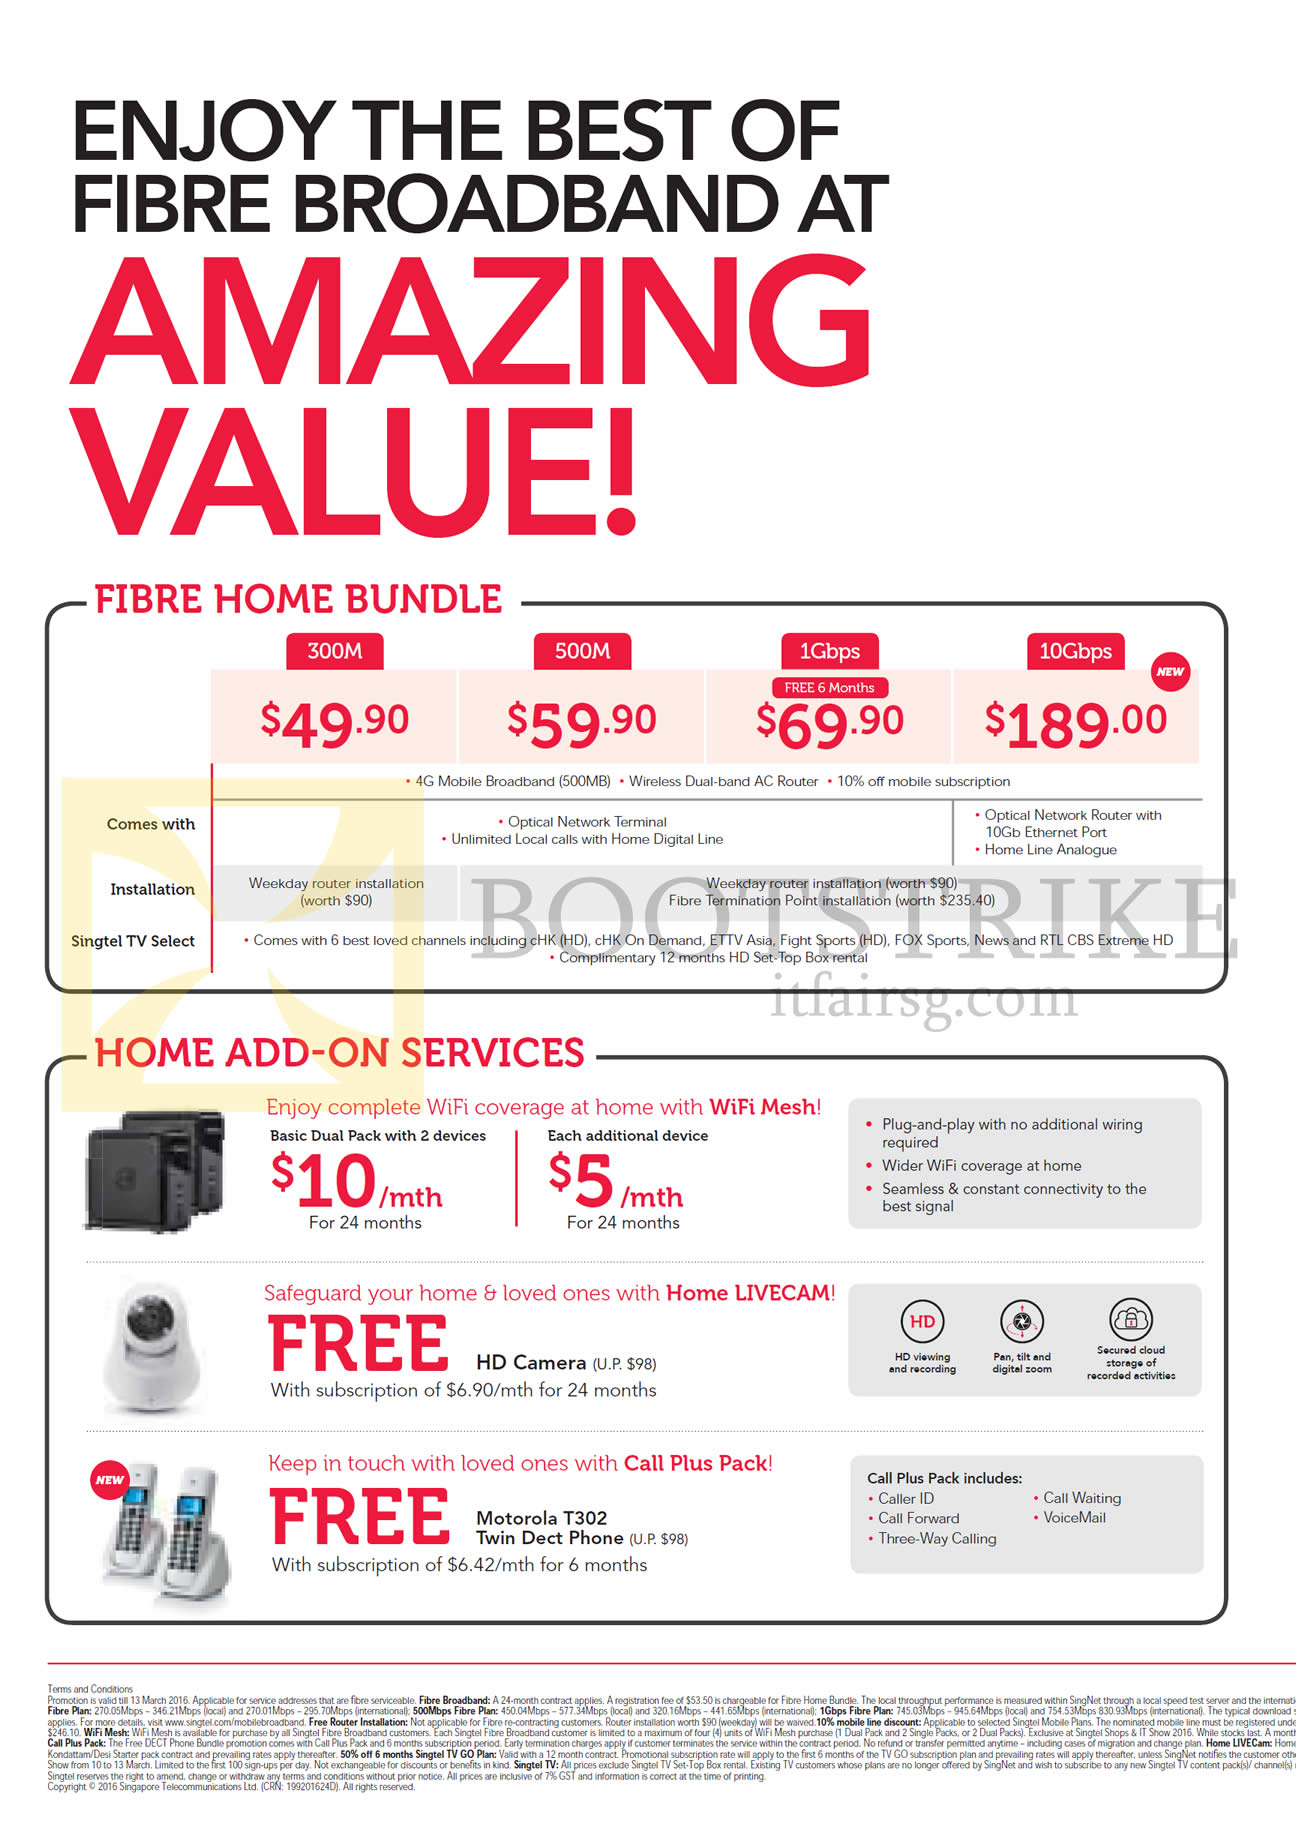 IT SHOW 2016 price list image brochure of Singtel Fibre Home Bundles, Home Add-On Services 49.90 300M, 59.90 500M, 69.90 1Gbps, 189.00 10Gbps, WiFi Mesh, Livecam, Call Plus Pack